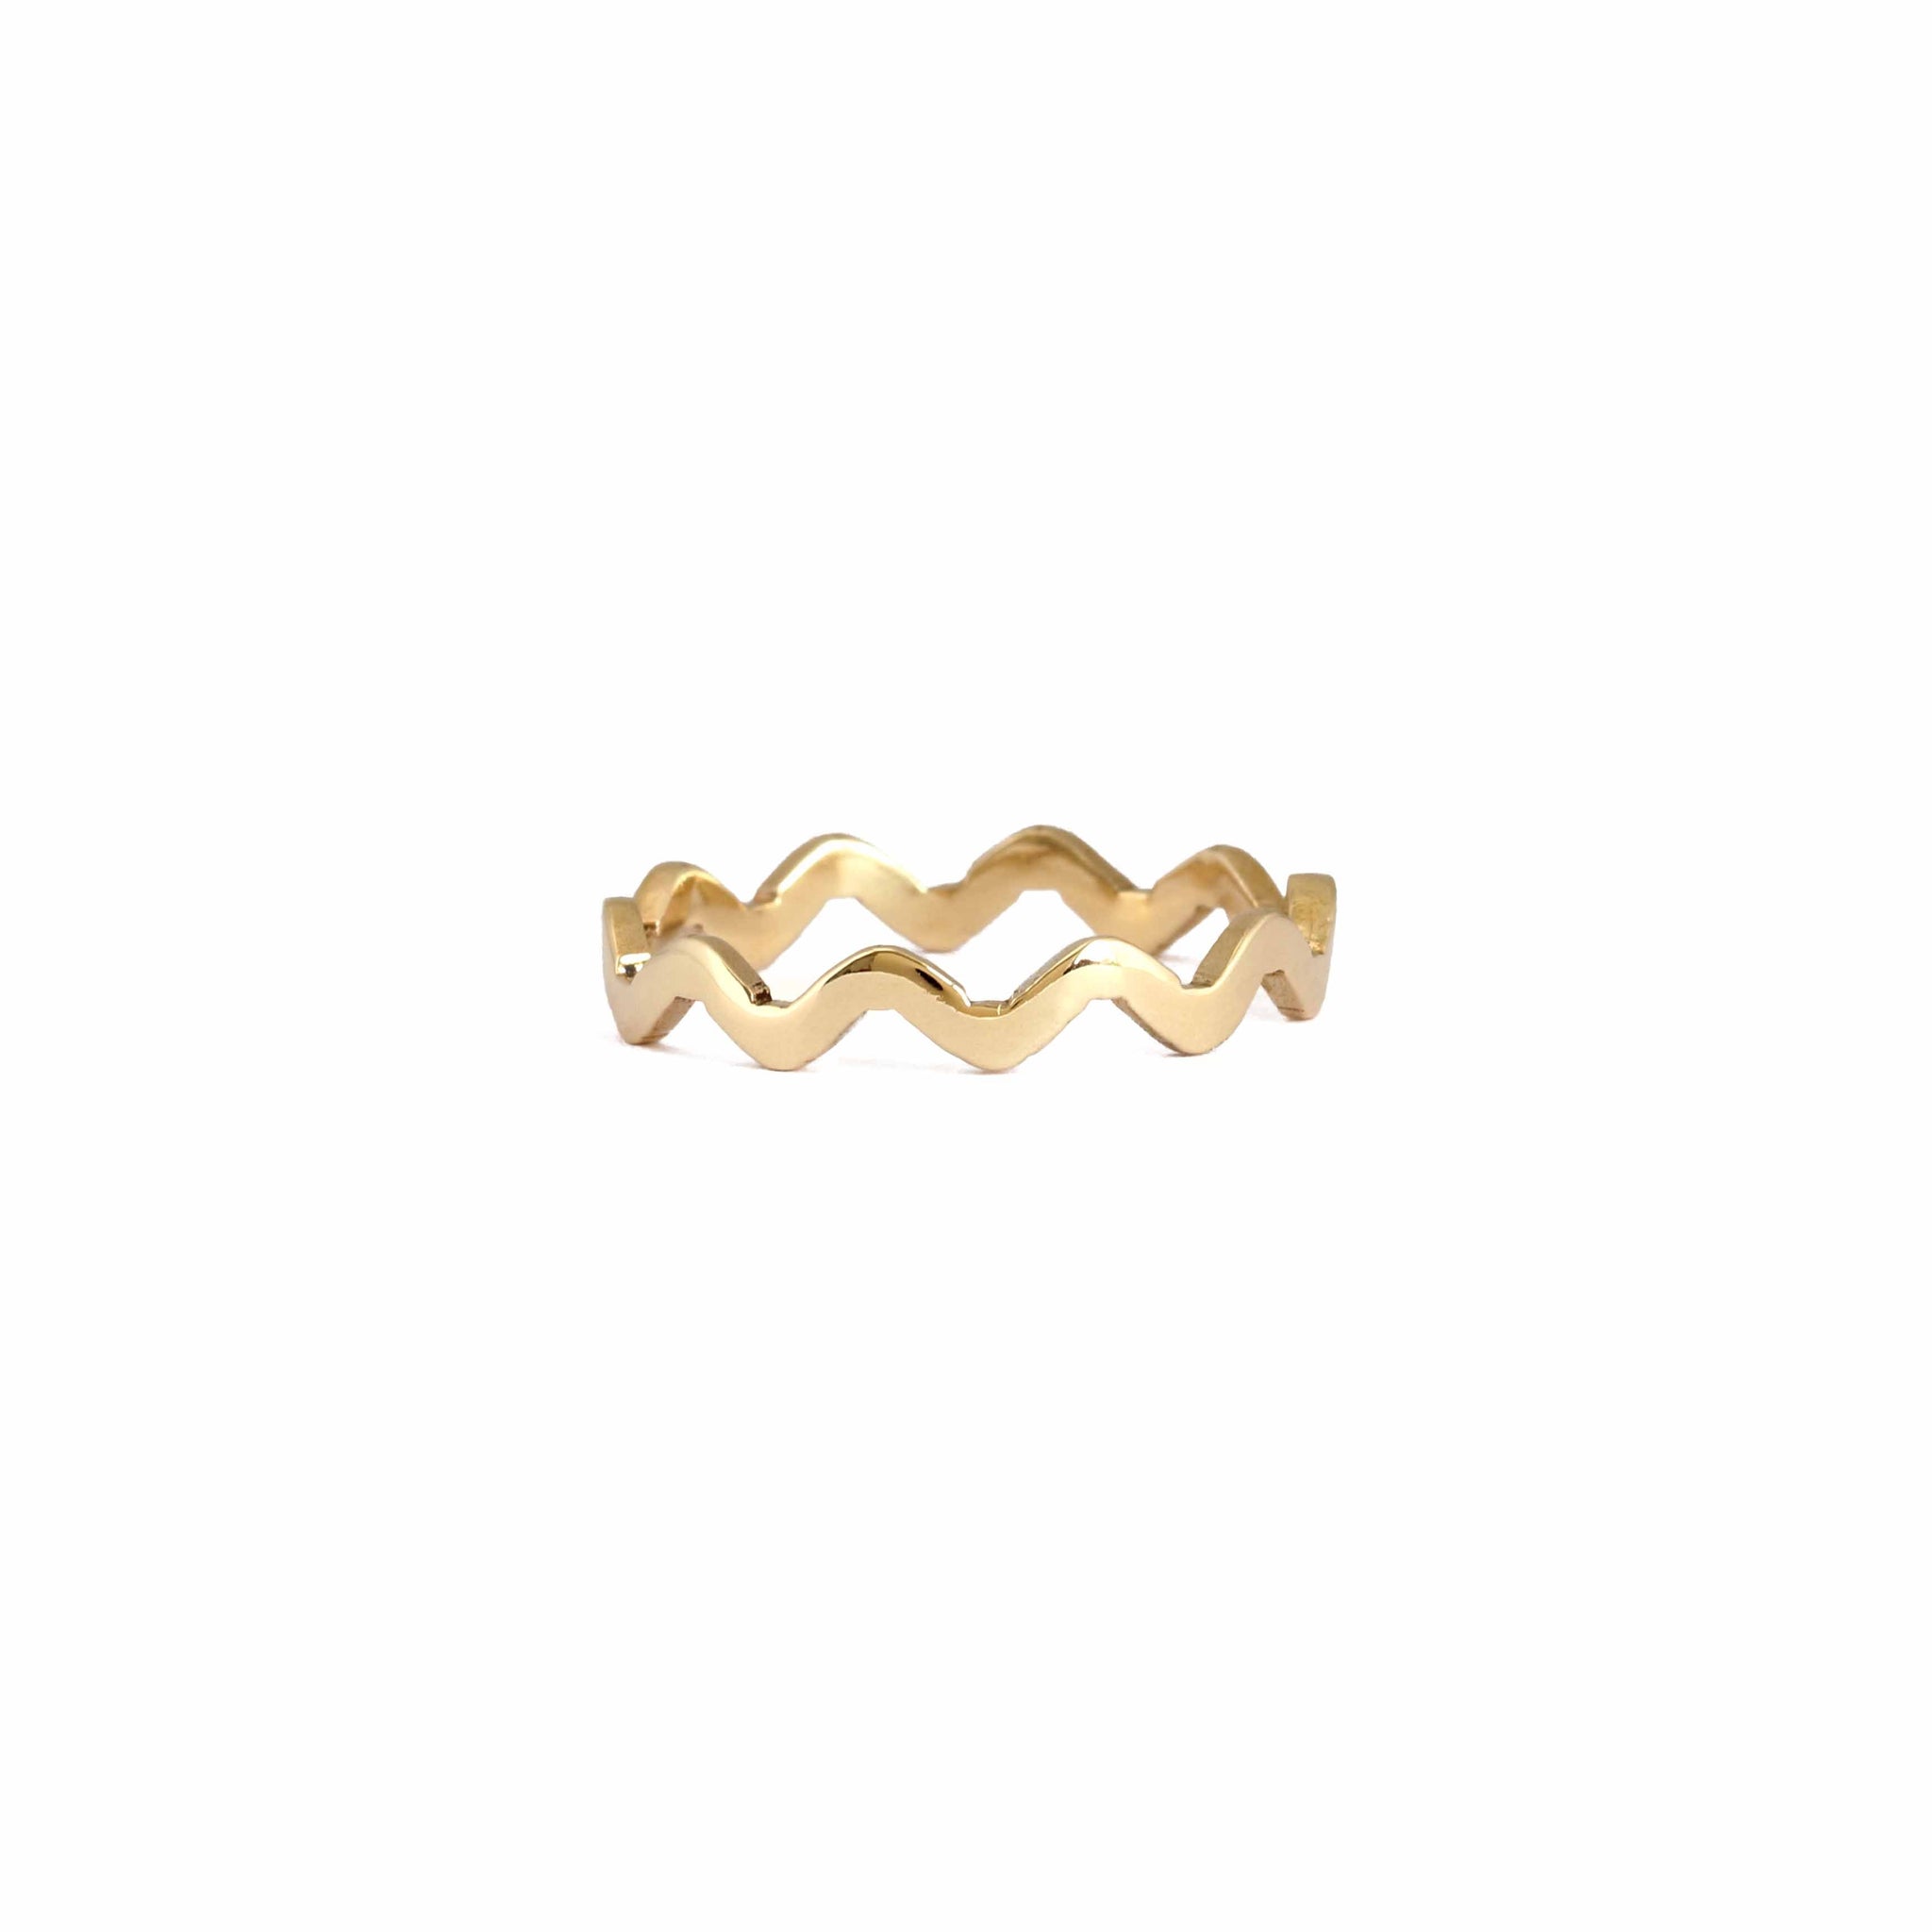 Solid gold stackable ring